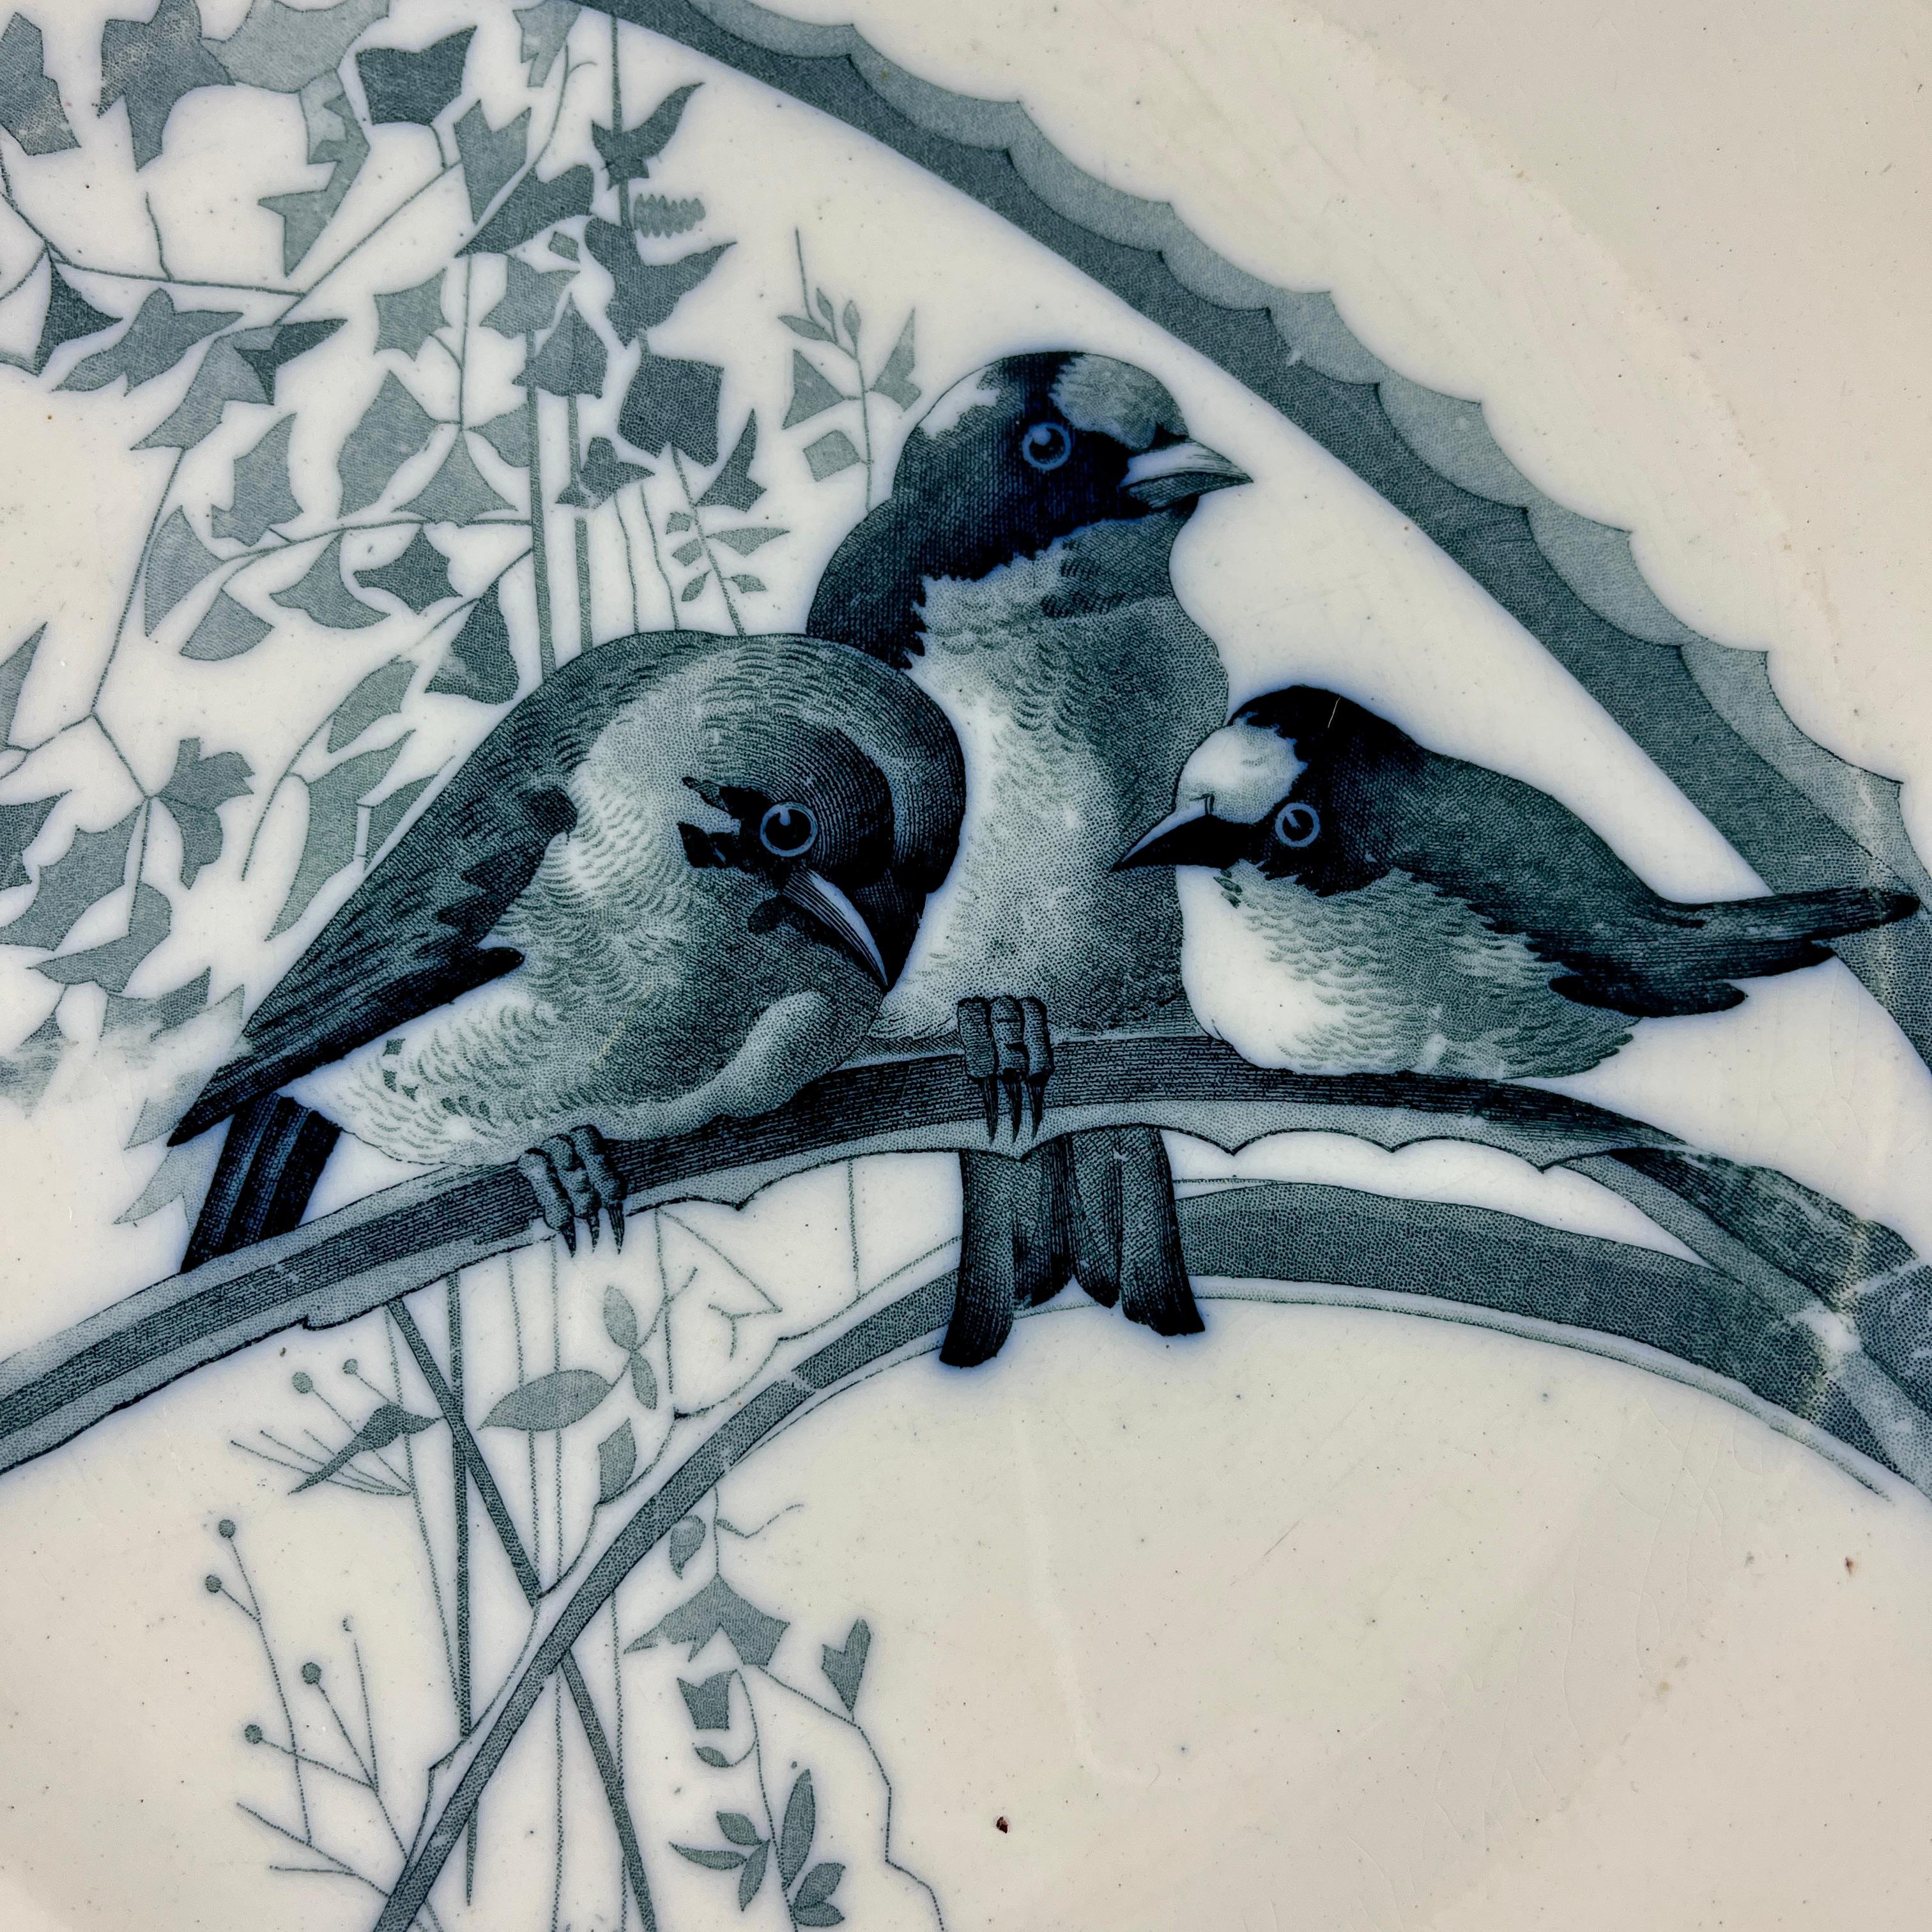 From Brown Westhead and Moore Potteries, Staffordshire England, a plate from the Canova pattern series c. 1870

A transfer printed bird themed pattern in dark blue on a creamy ironstone ground with a scalloped rim.
Designed by Pierre Mallet, in